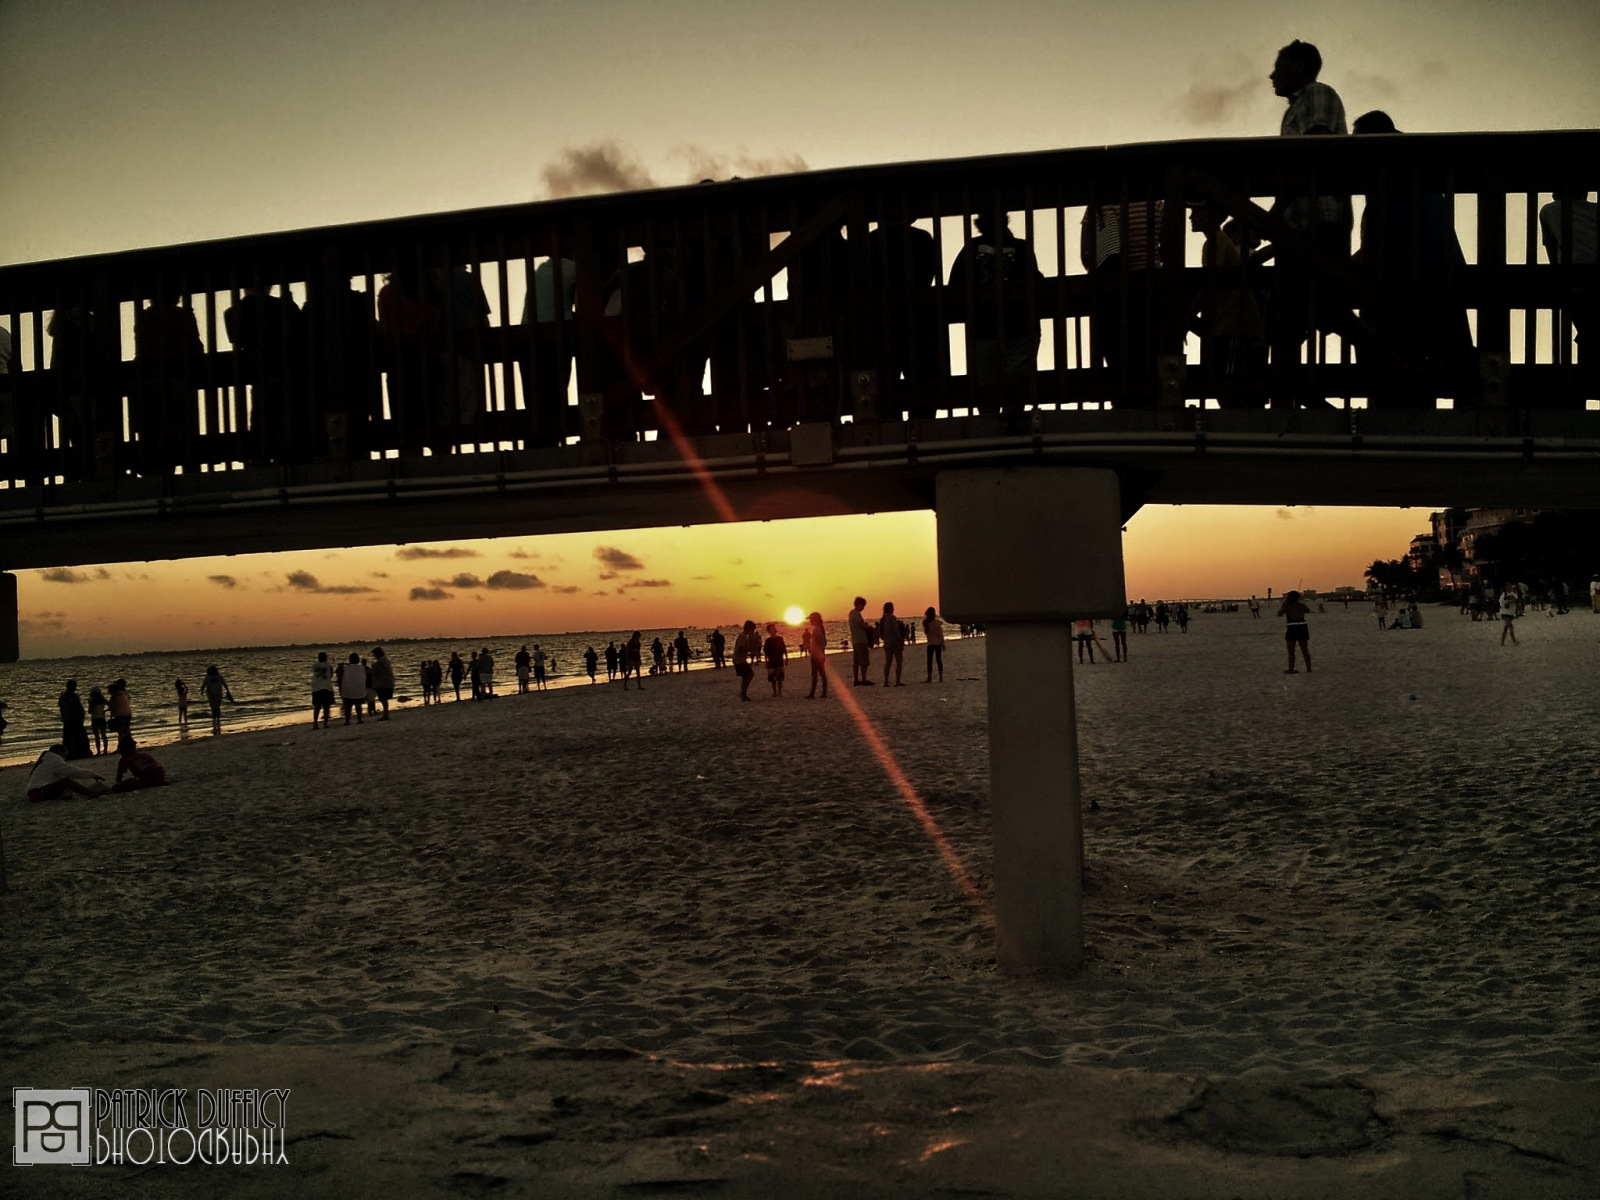 sunset-under-the-pier_15586333994_o